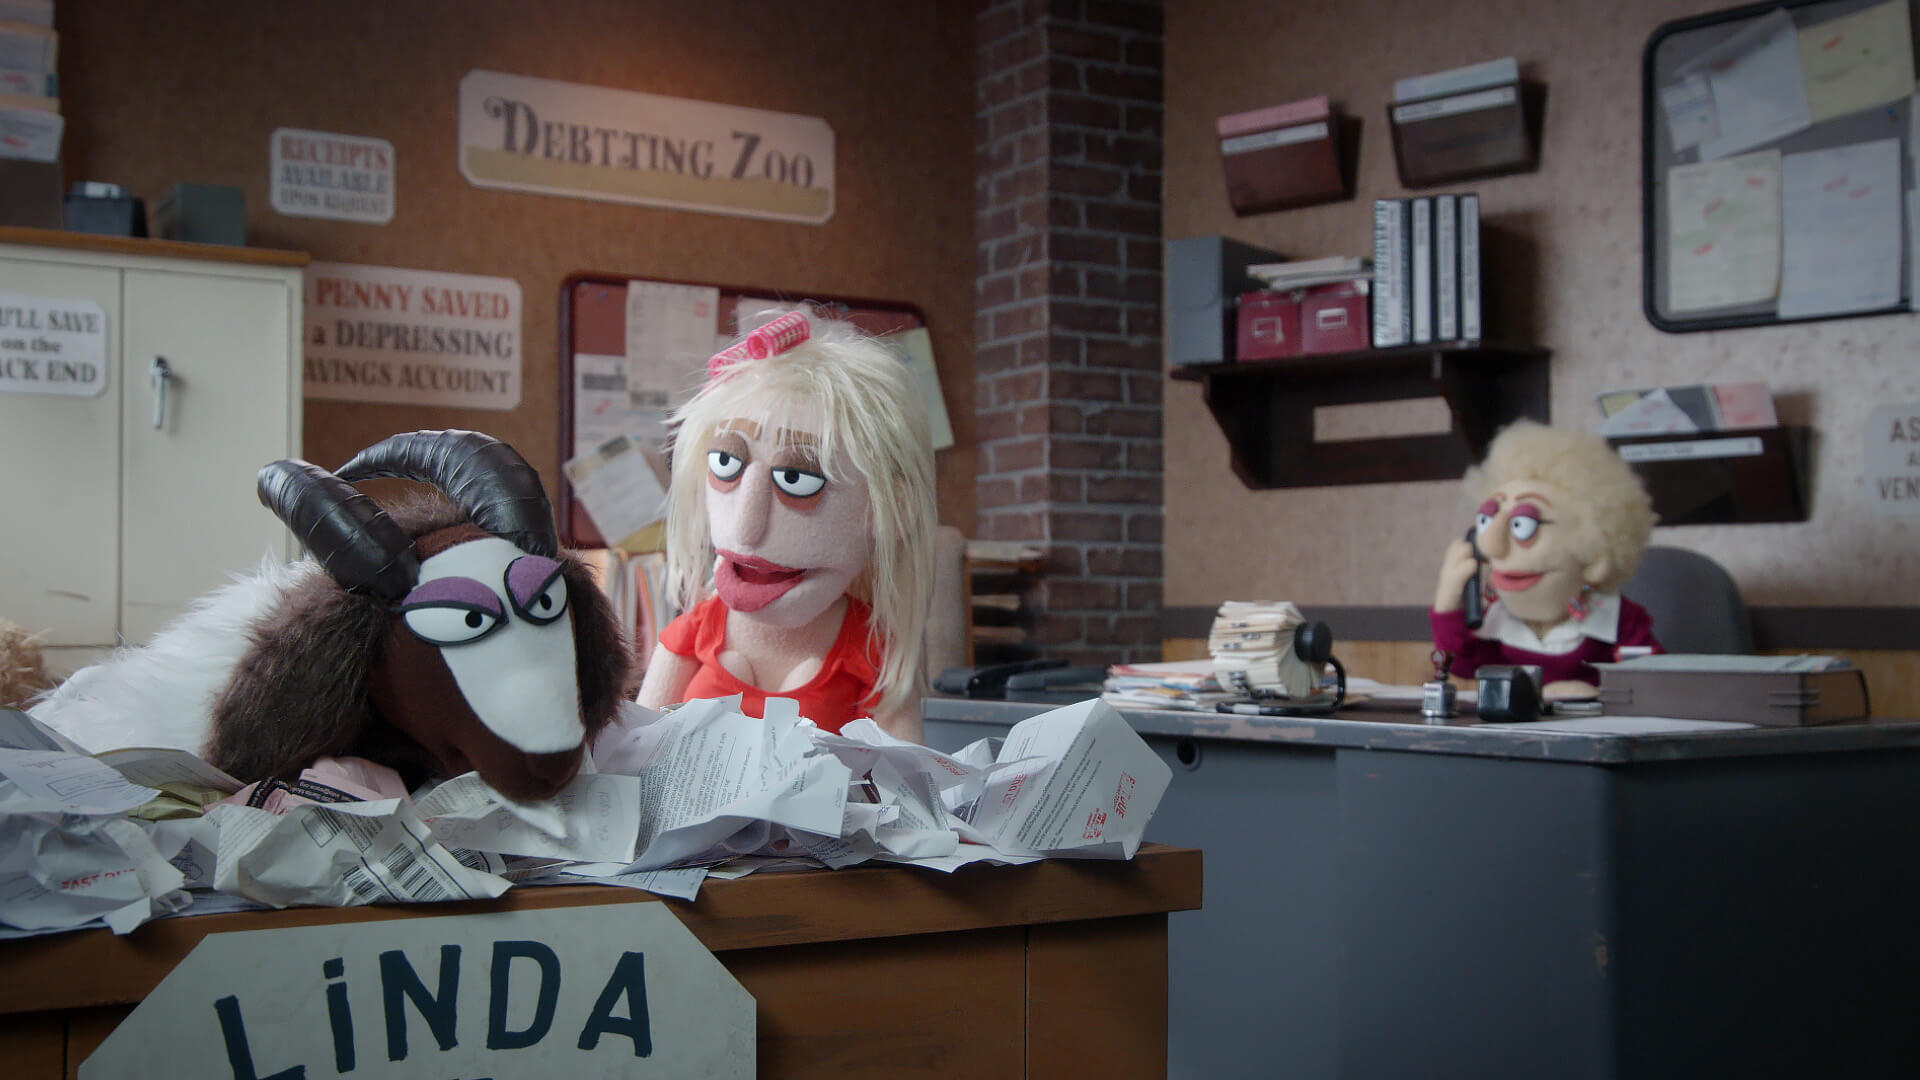 Linda the debt consolidating goat from a scene directed by Todd Bishop for Comedy Central's Crank Yankers